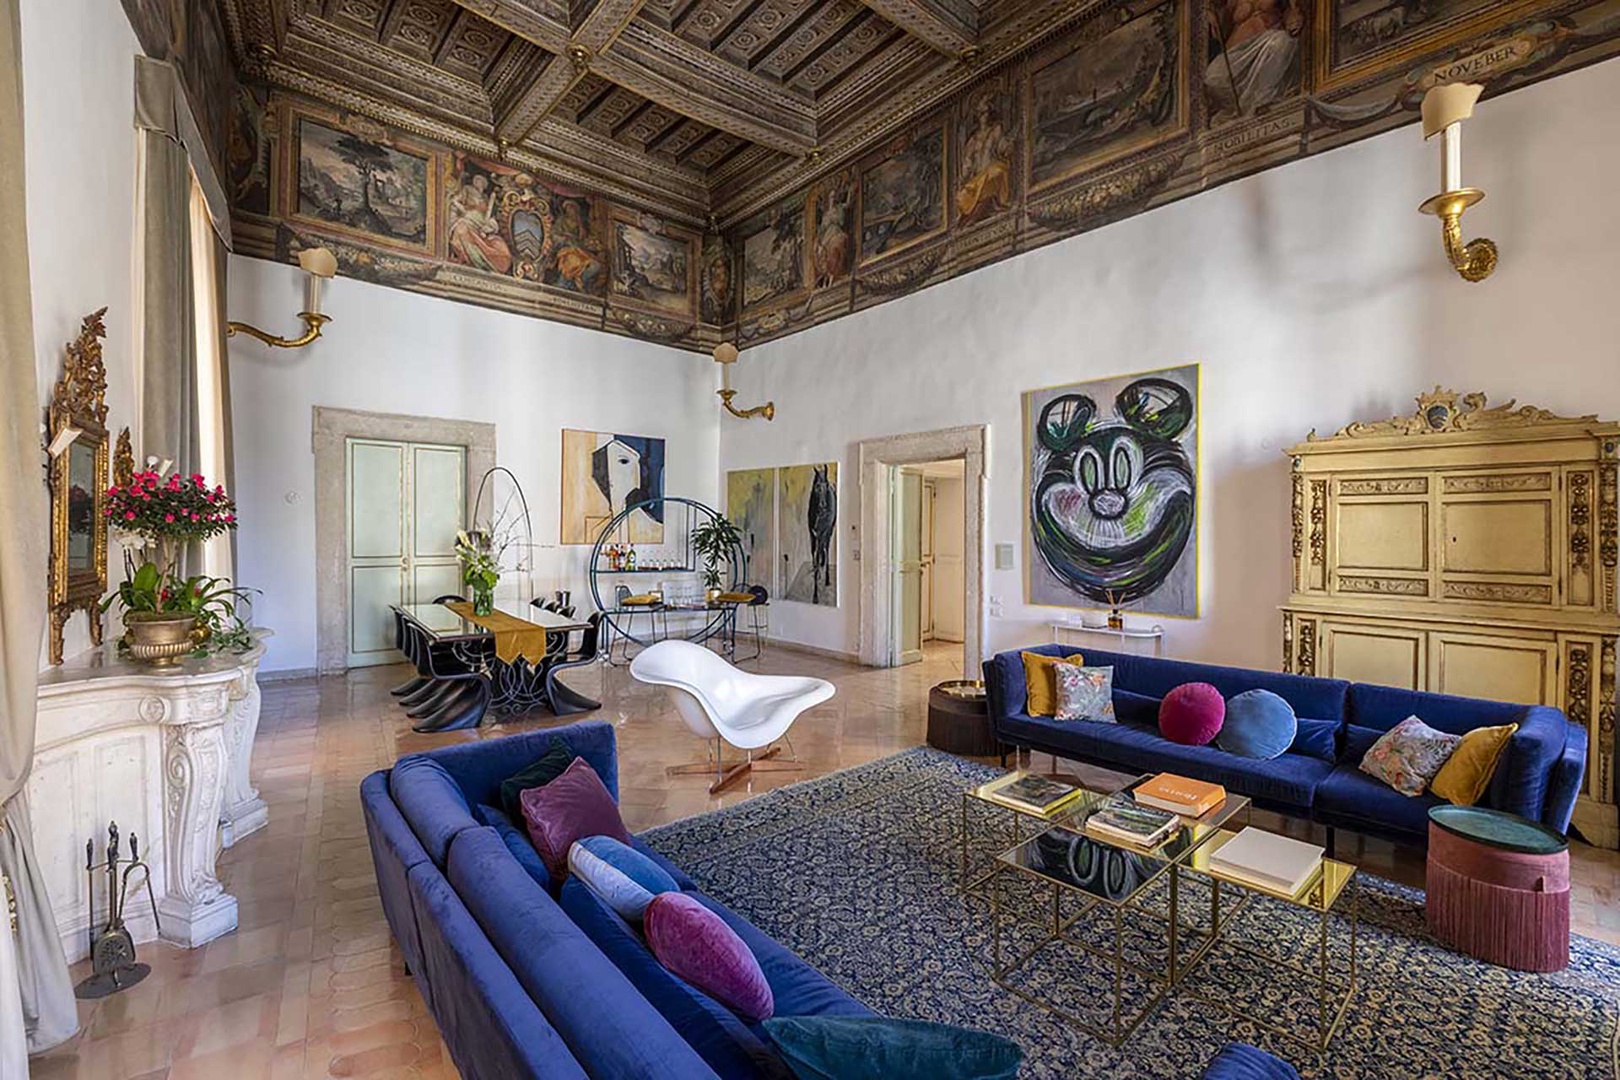 An intriguing contrast of ancient ceiling and frescoes with modern furnishings.